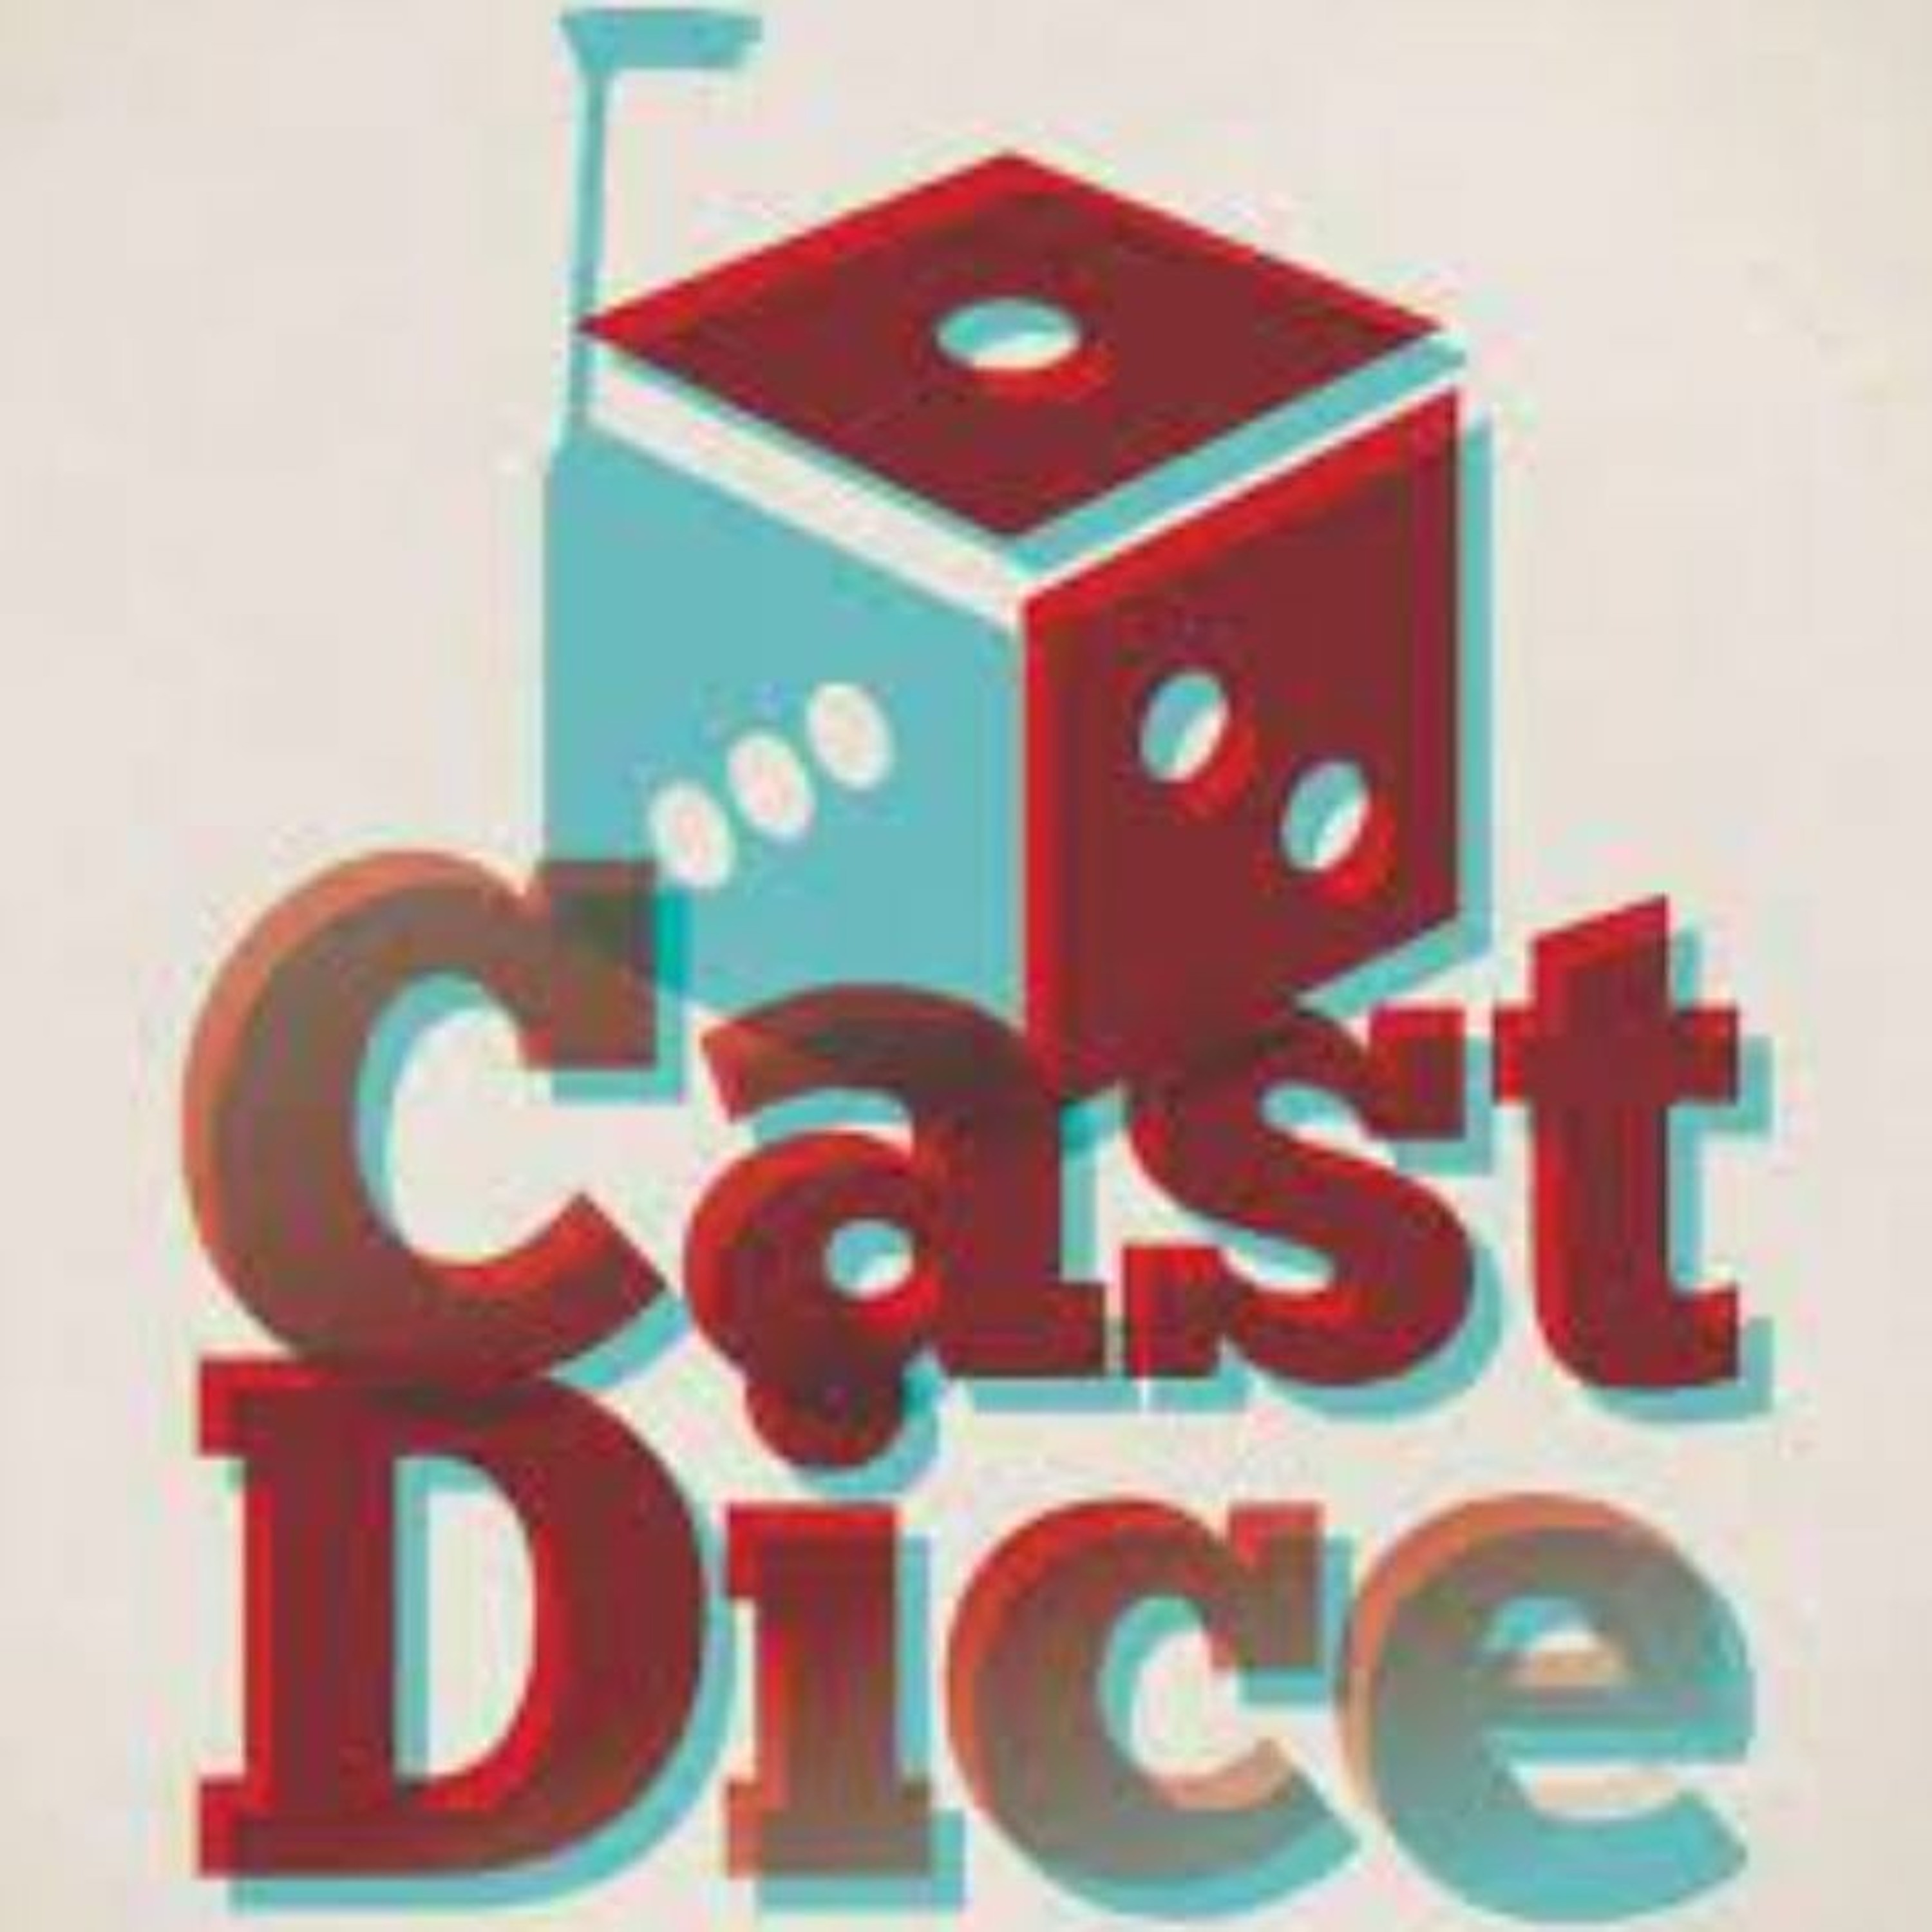 The Cast Dice Podcast - Ep 199 - Listing With Finns (Bolt Action)